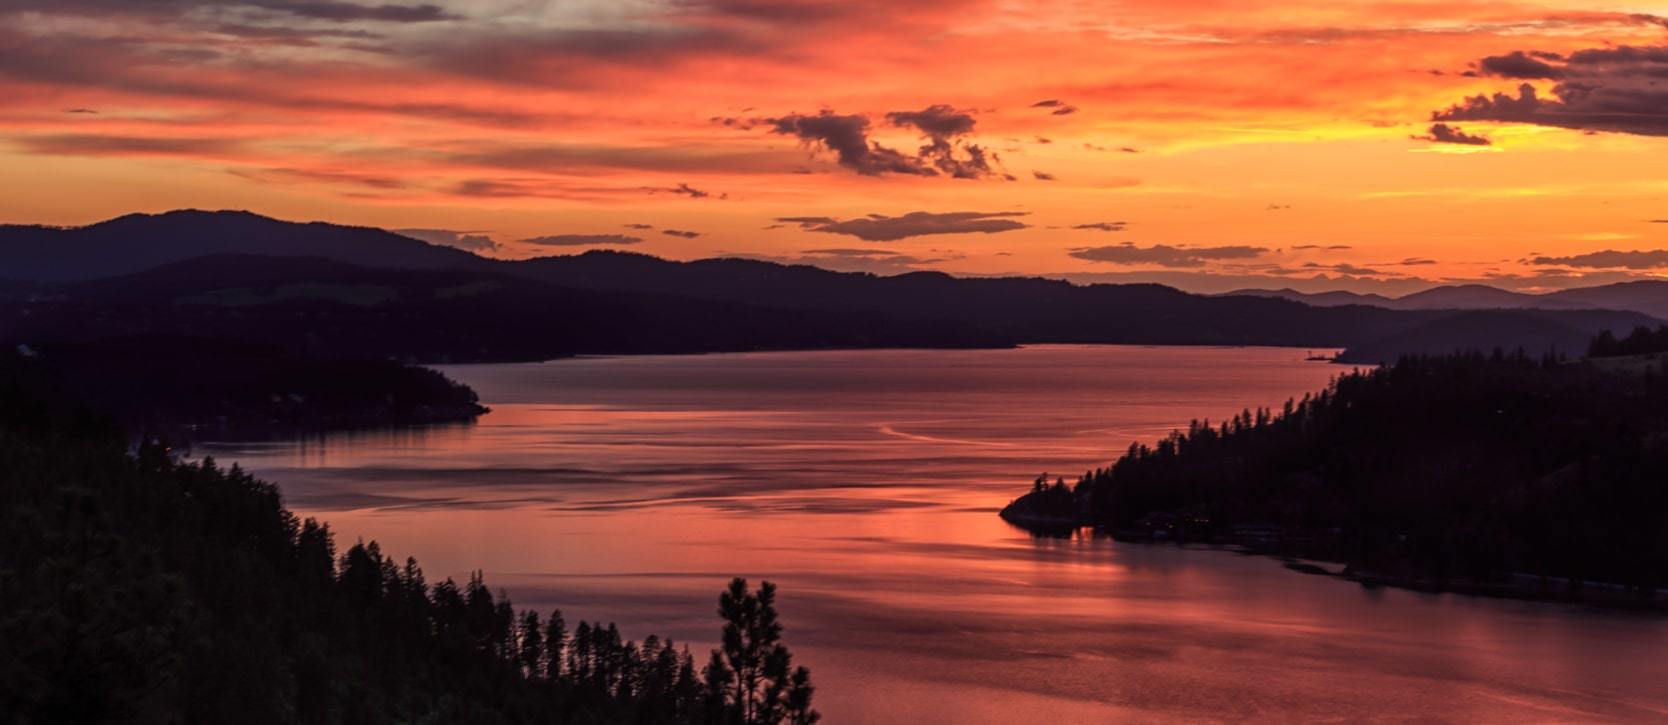 Stunning sunset overlooking a beautiful lake in Coeur d'Alene near The Falls At Hayden Lake 